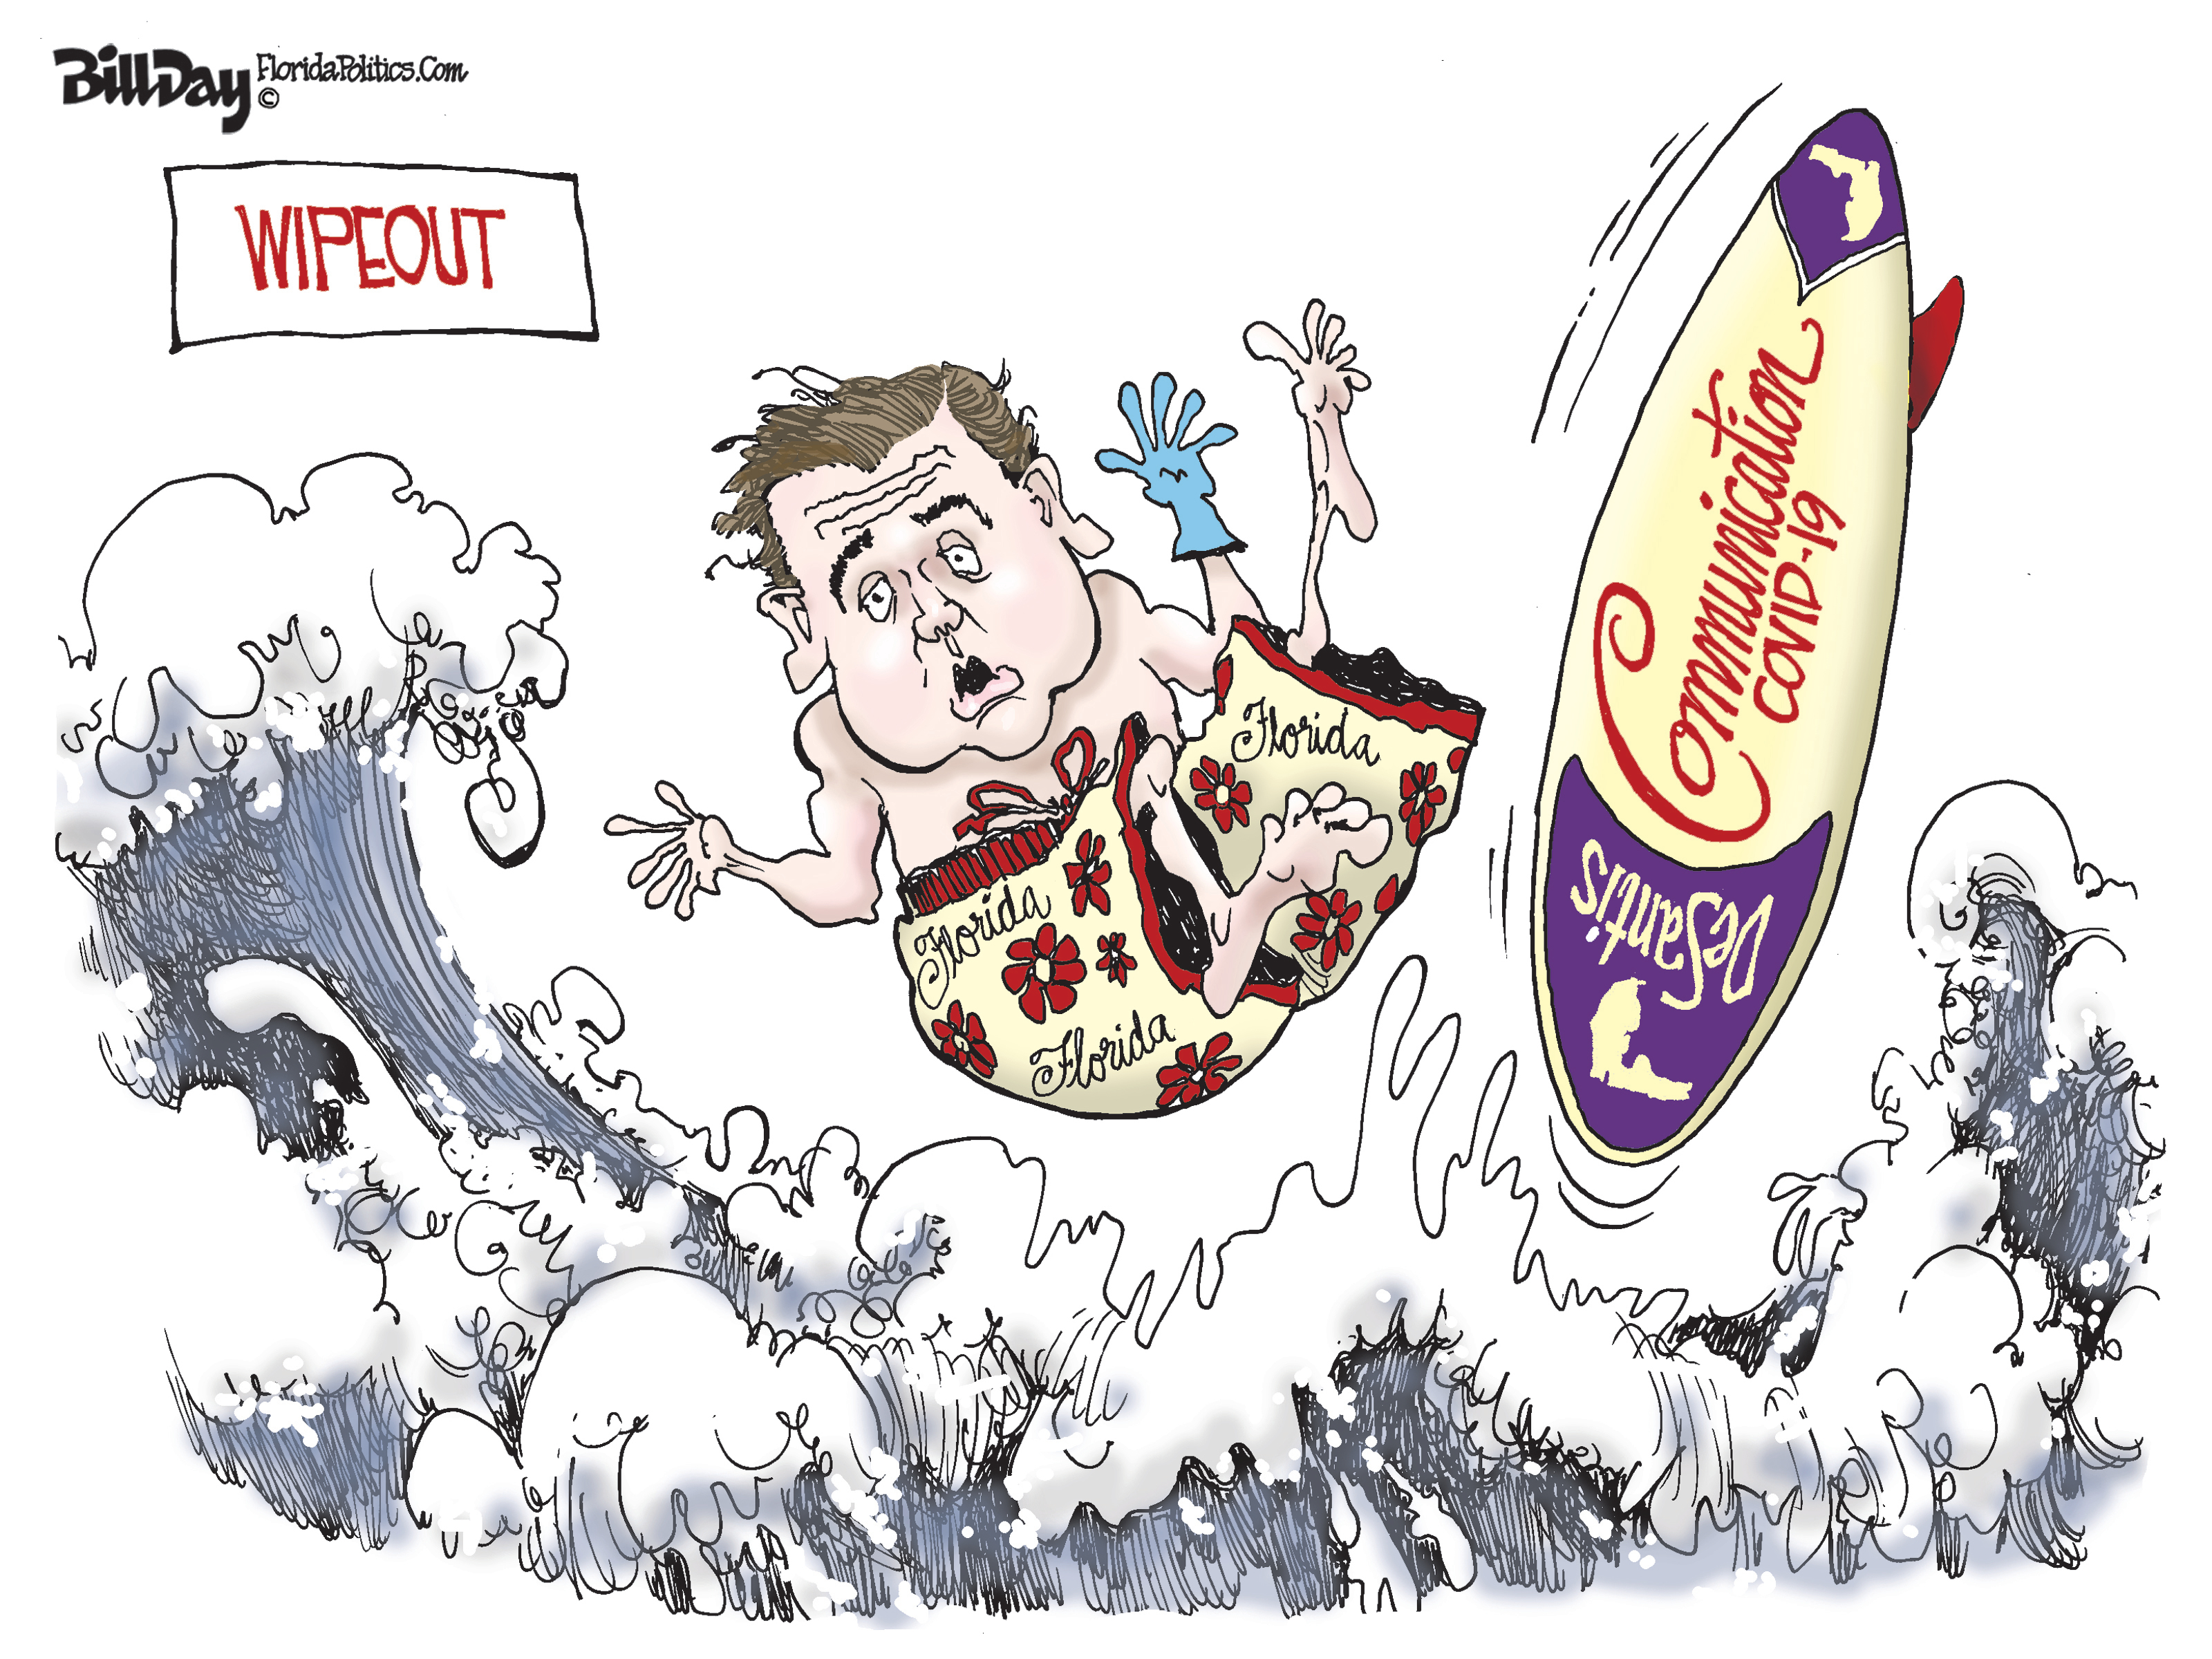 Political Cartoon U.S. Florida governor DeSantis wipes out loses favorability trust of the state